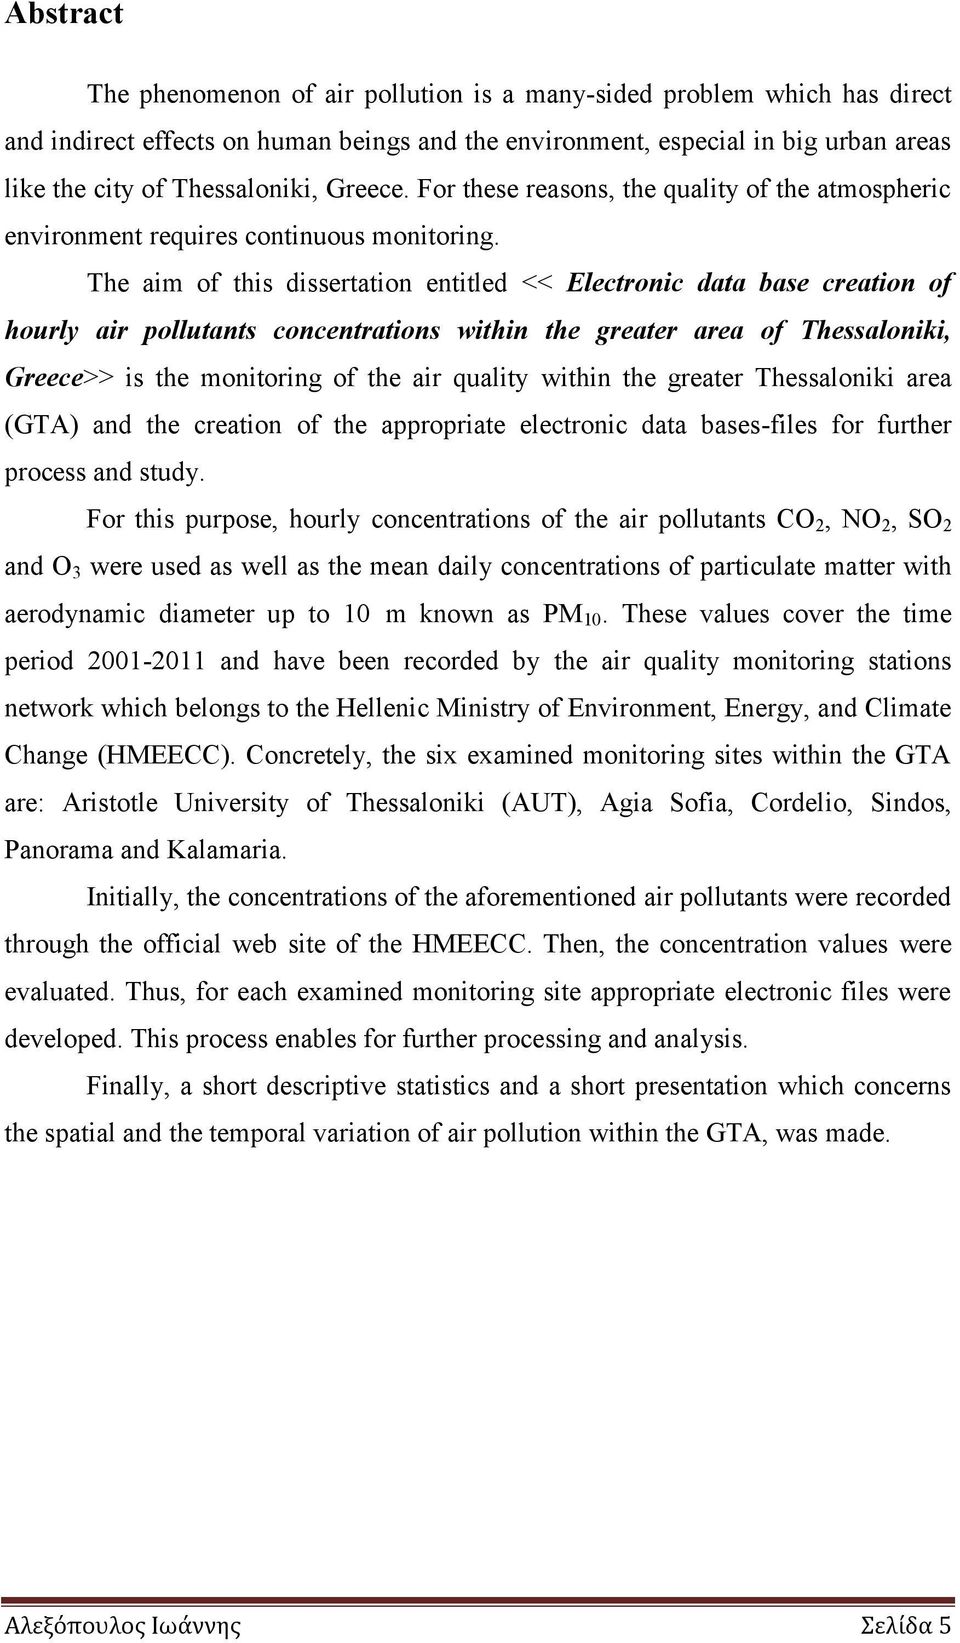 The aim of this dissertation entitled << Electronic data base creation of hourly air pollutants concentrations within the greater area of Thessaloniki, Greece>> is the monitoring of the air quality